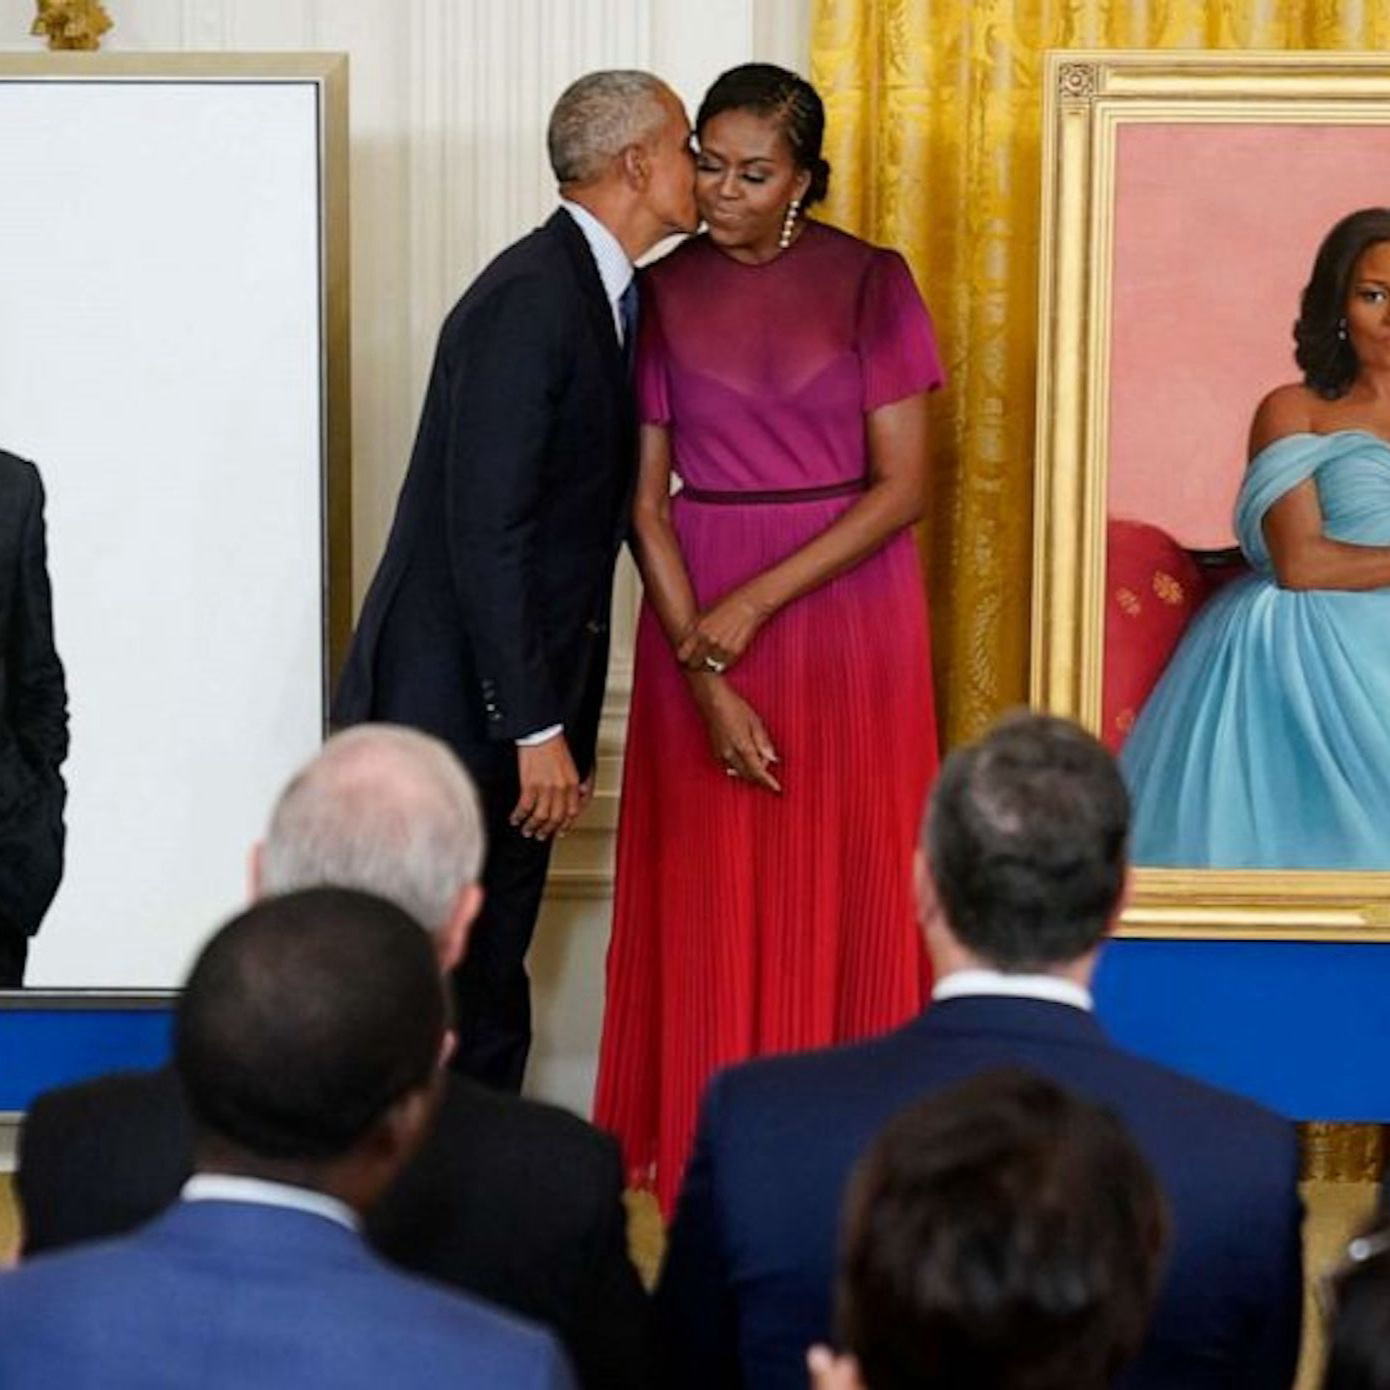 Barack and Michelle Obama in front of their Official White House portraits.